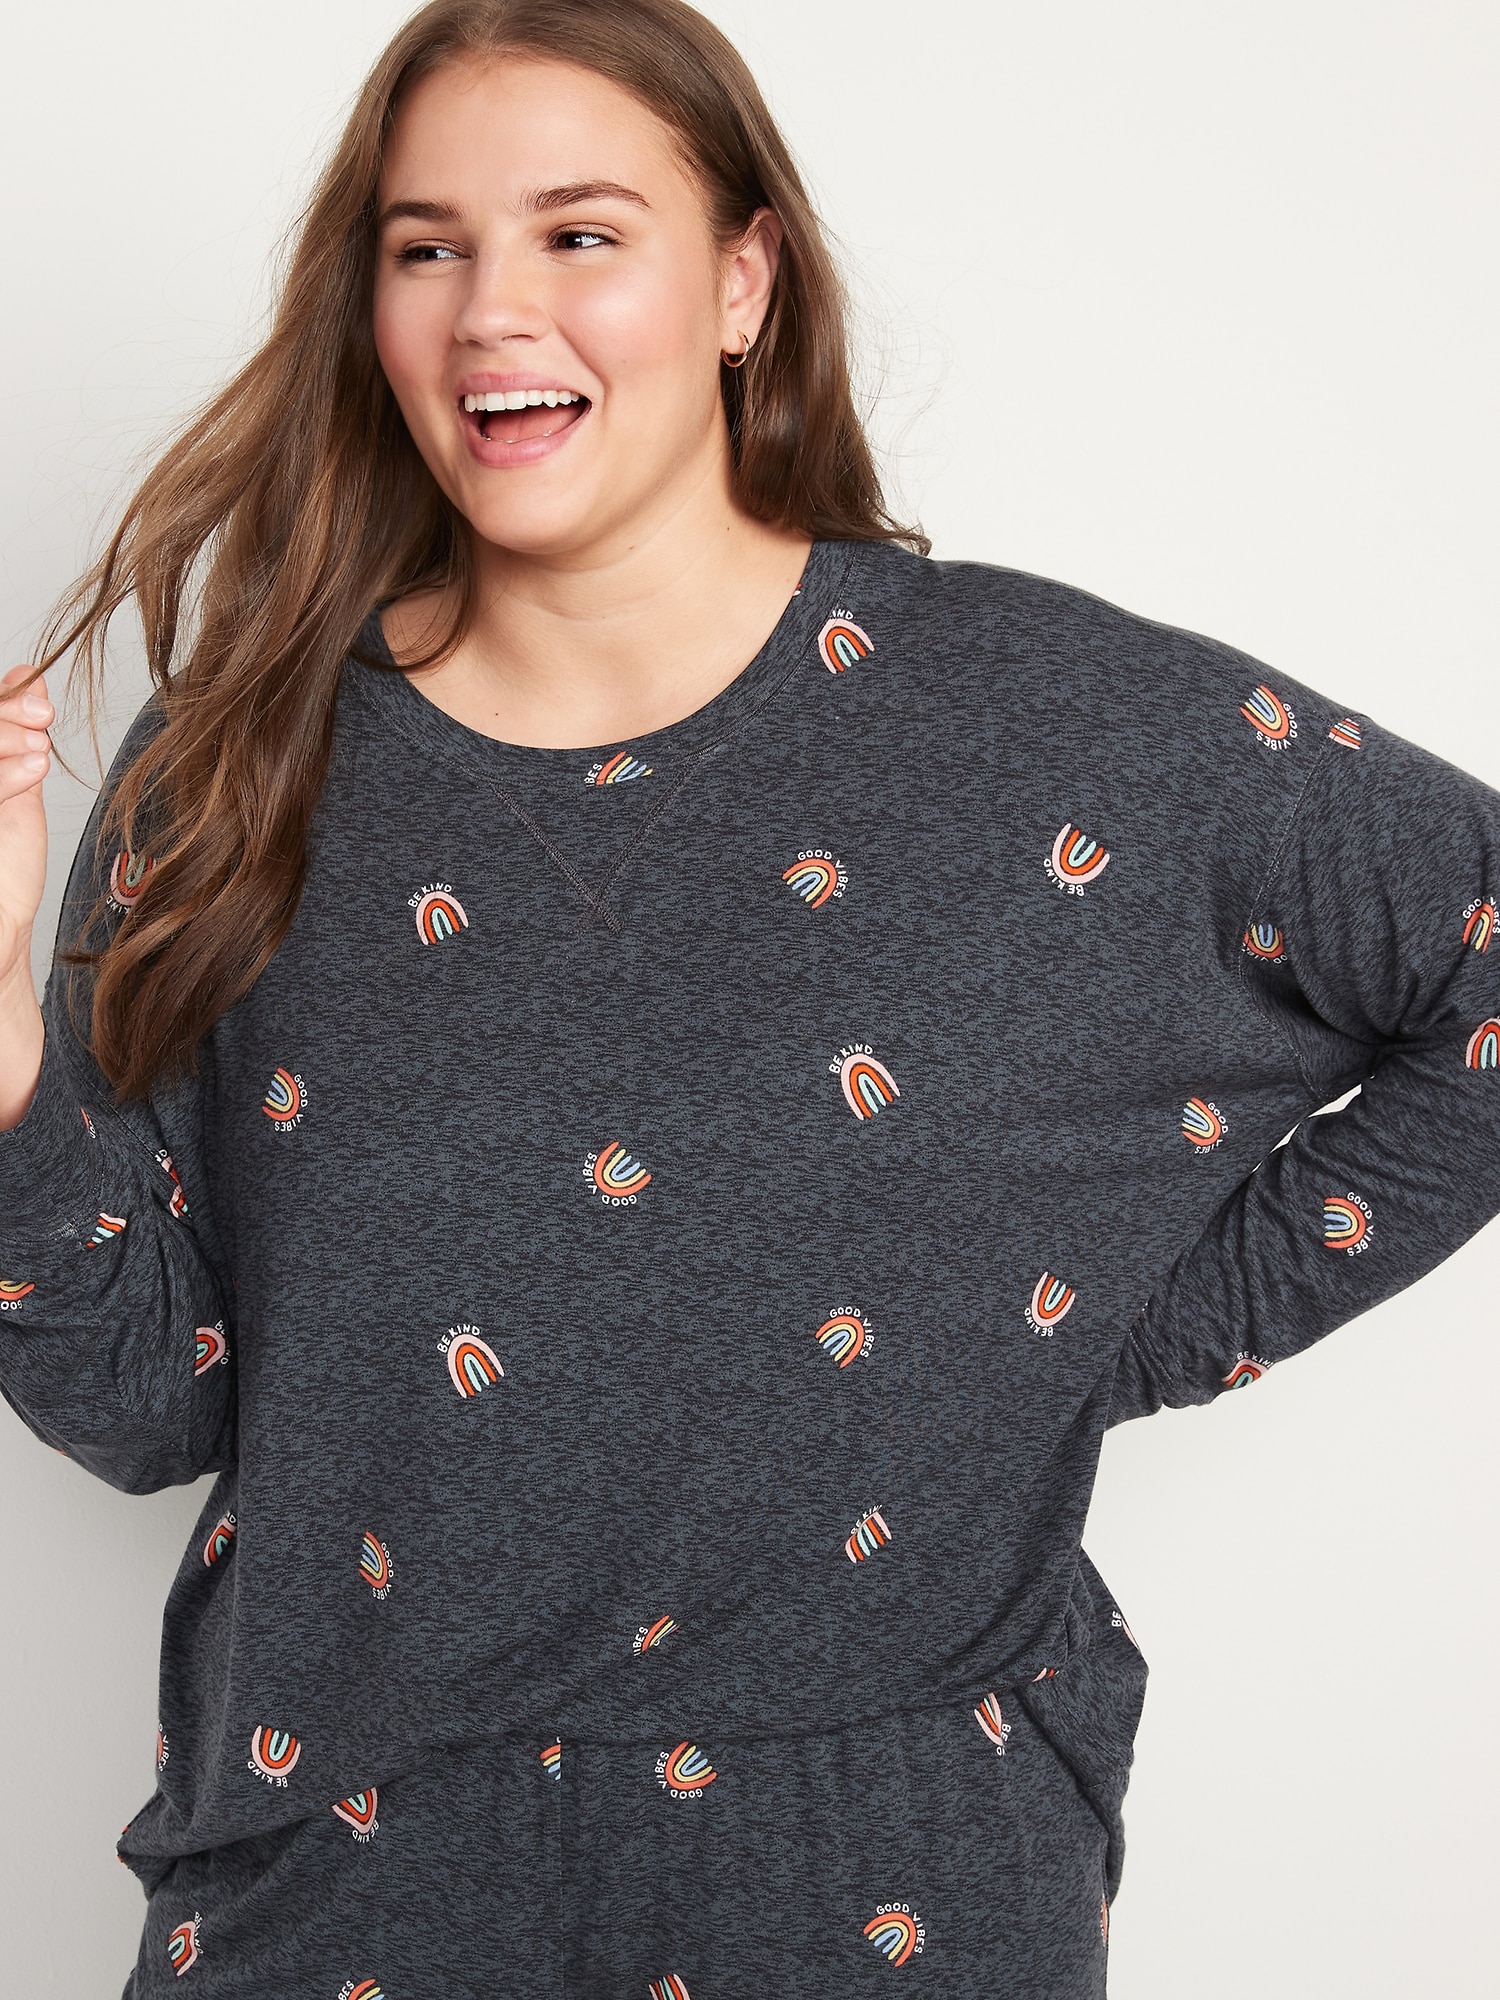 Womens Plus Size Just Hit The Snooze Button Pajama Top and Polka